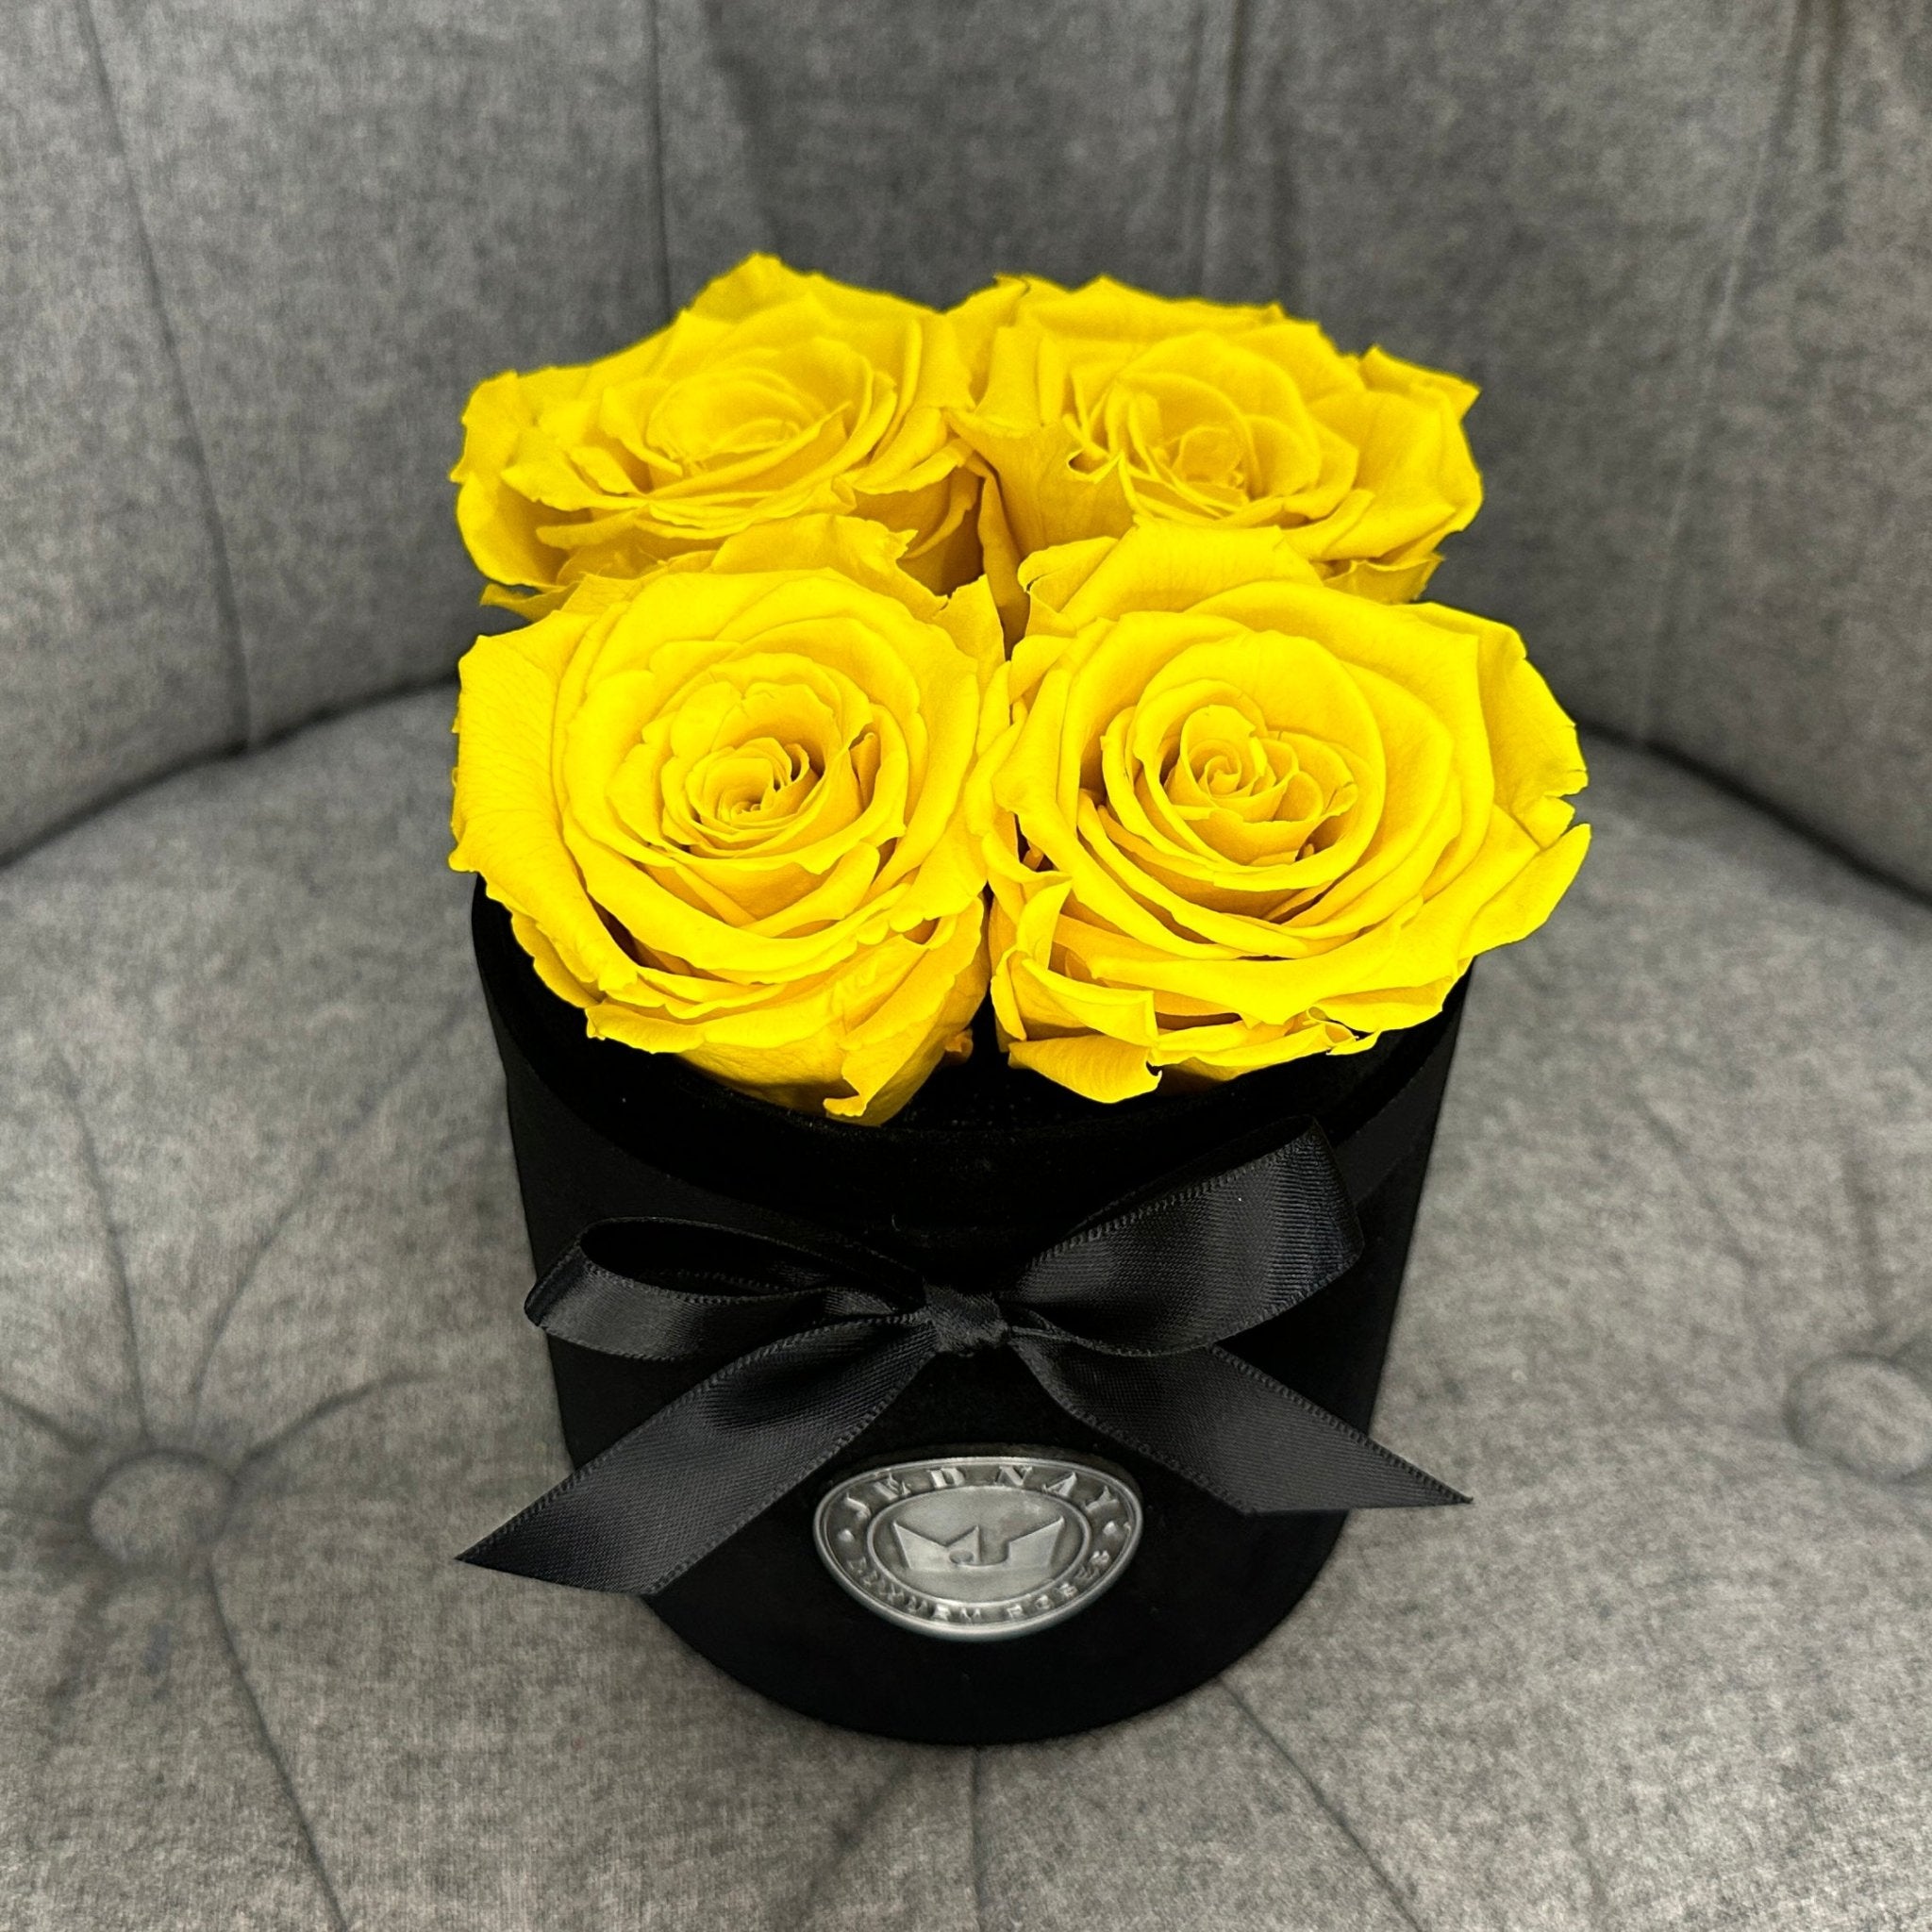 Petite Black Suede Forever Rose Box - Sunshine Yellow Eternal Roses - Jednay Roses